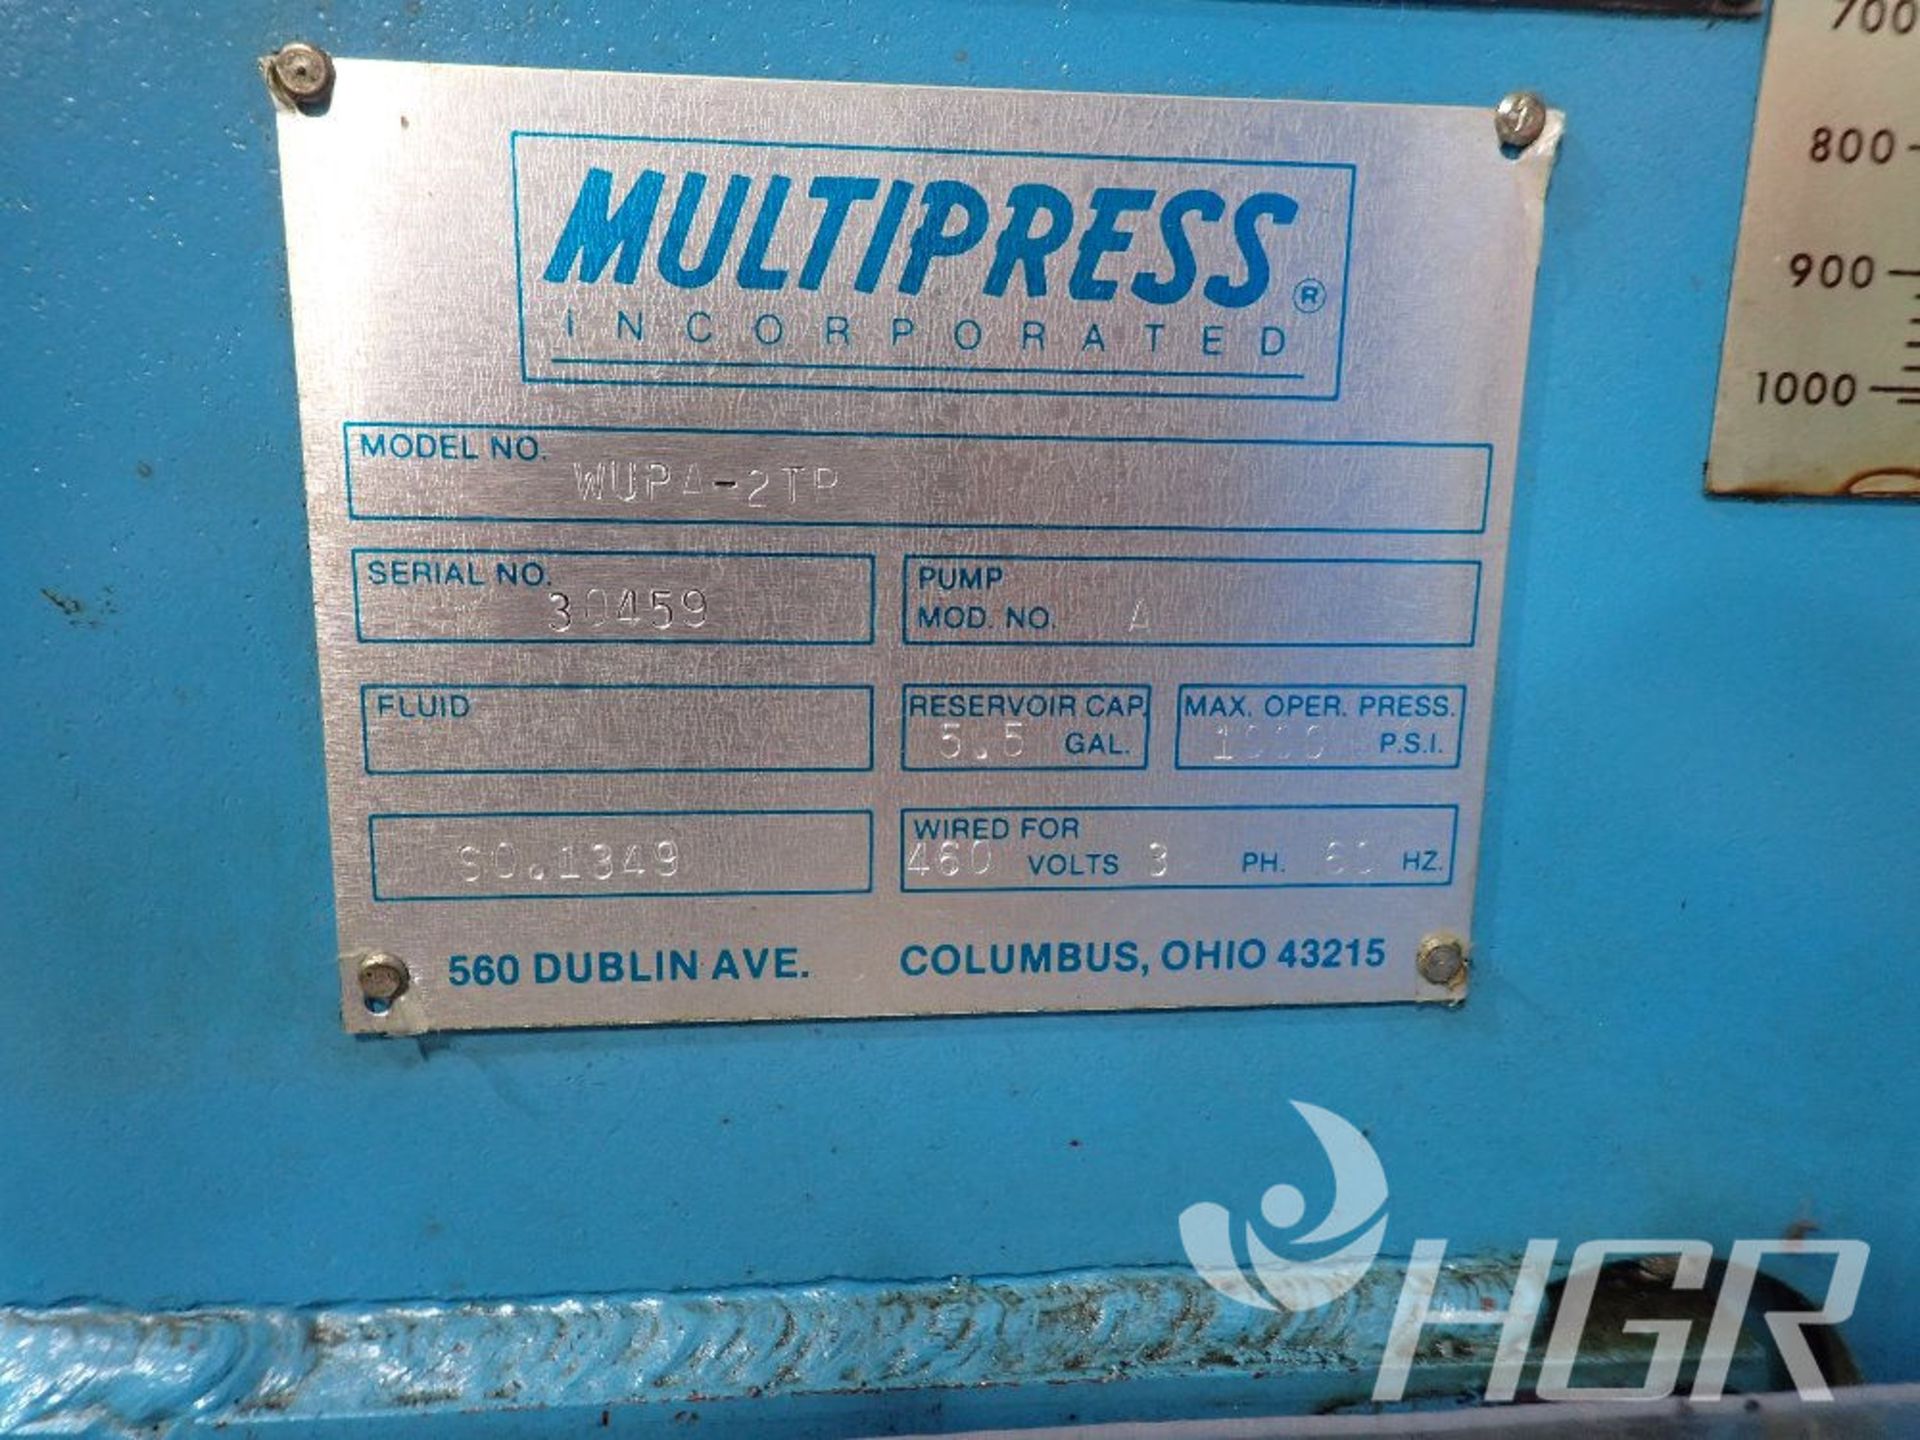 MULTIPRESS PRESS, Model WUPA-2TR, Date: n/a; s/n 30459, Approx. Capacity: n/a, Power: 3/60/460, - Image 4 of 18